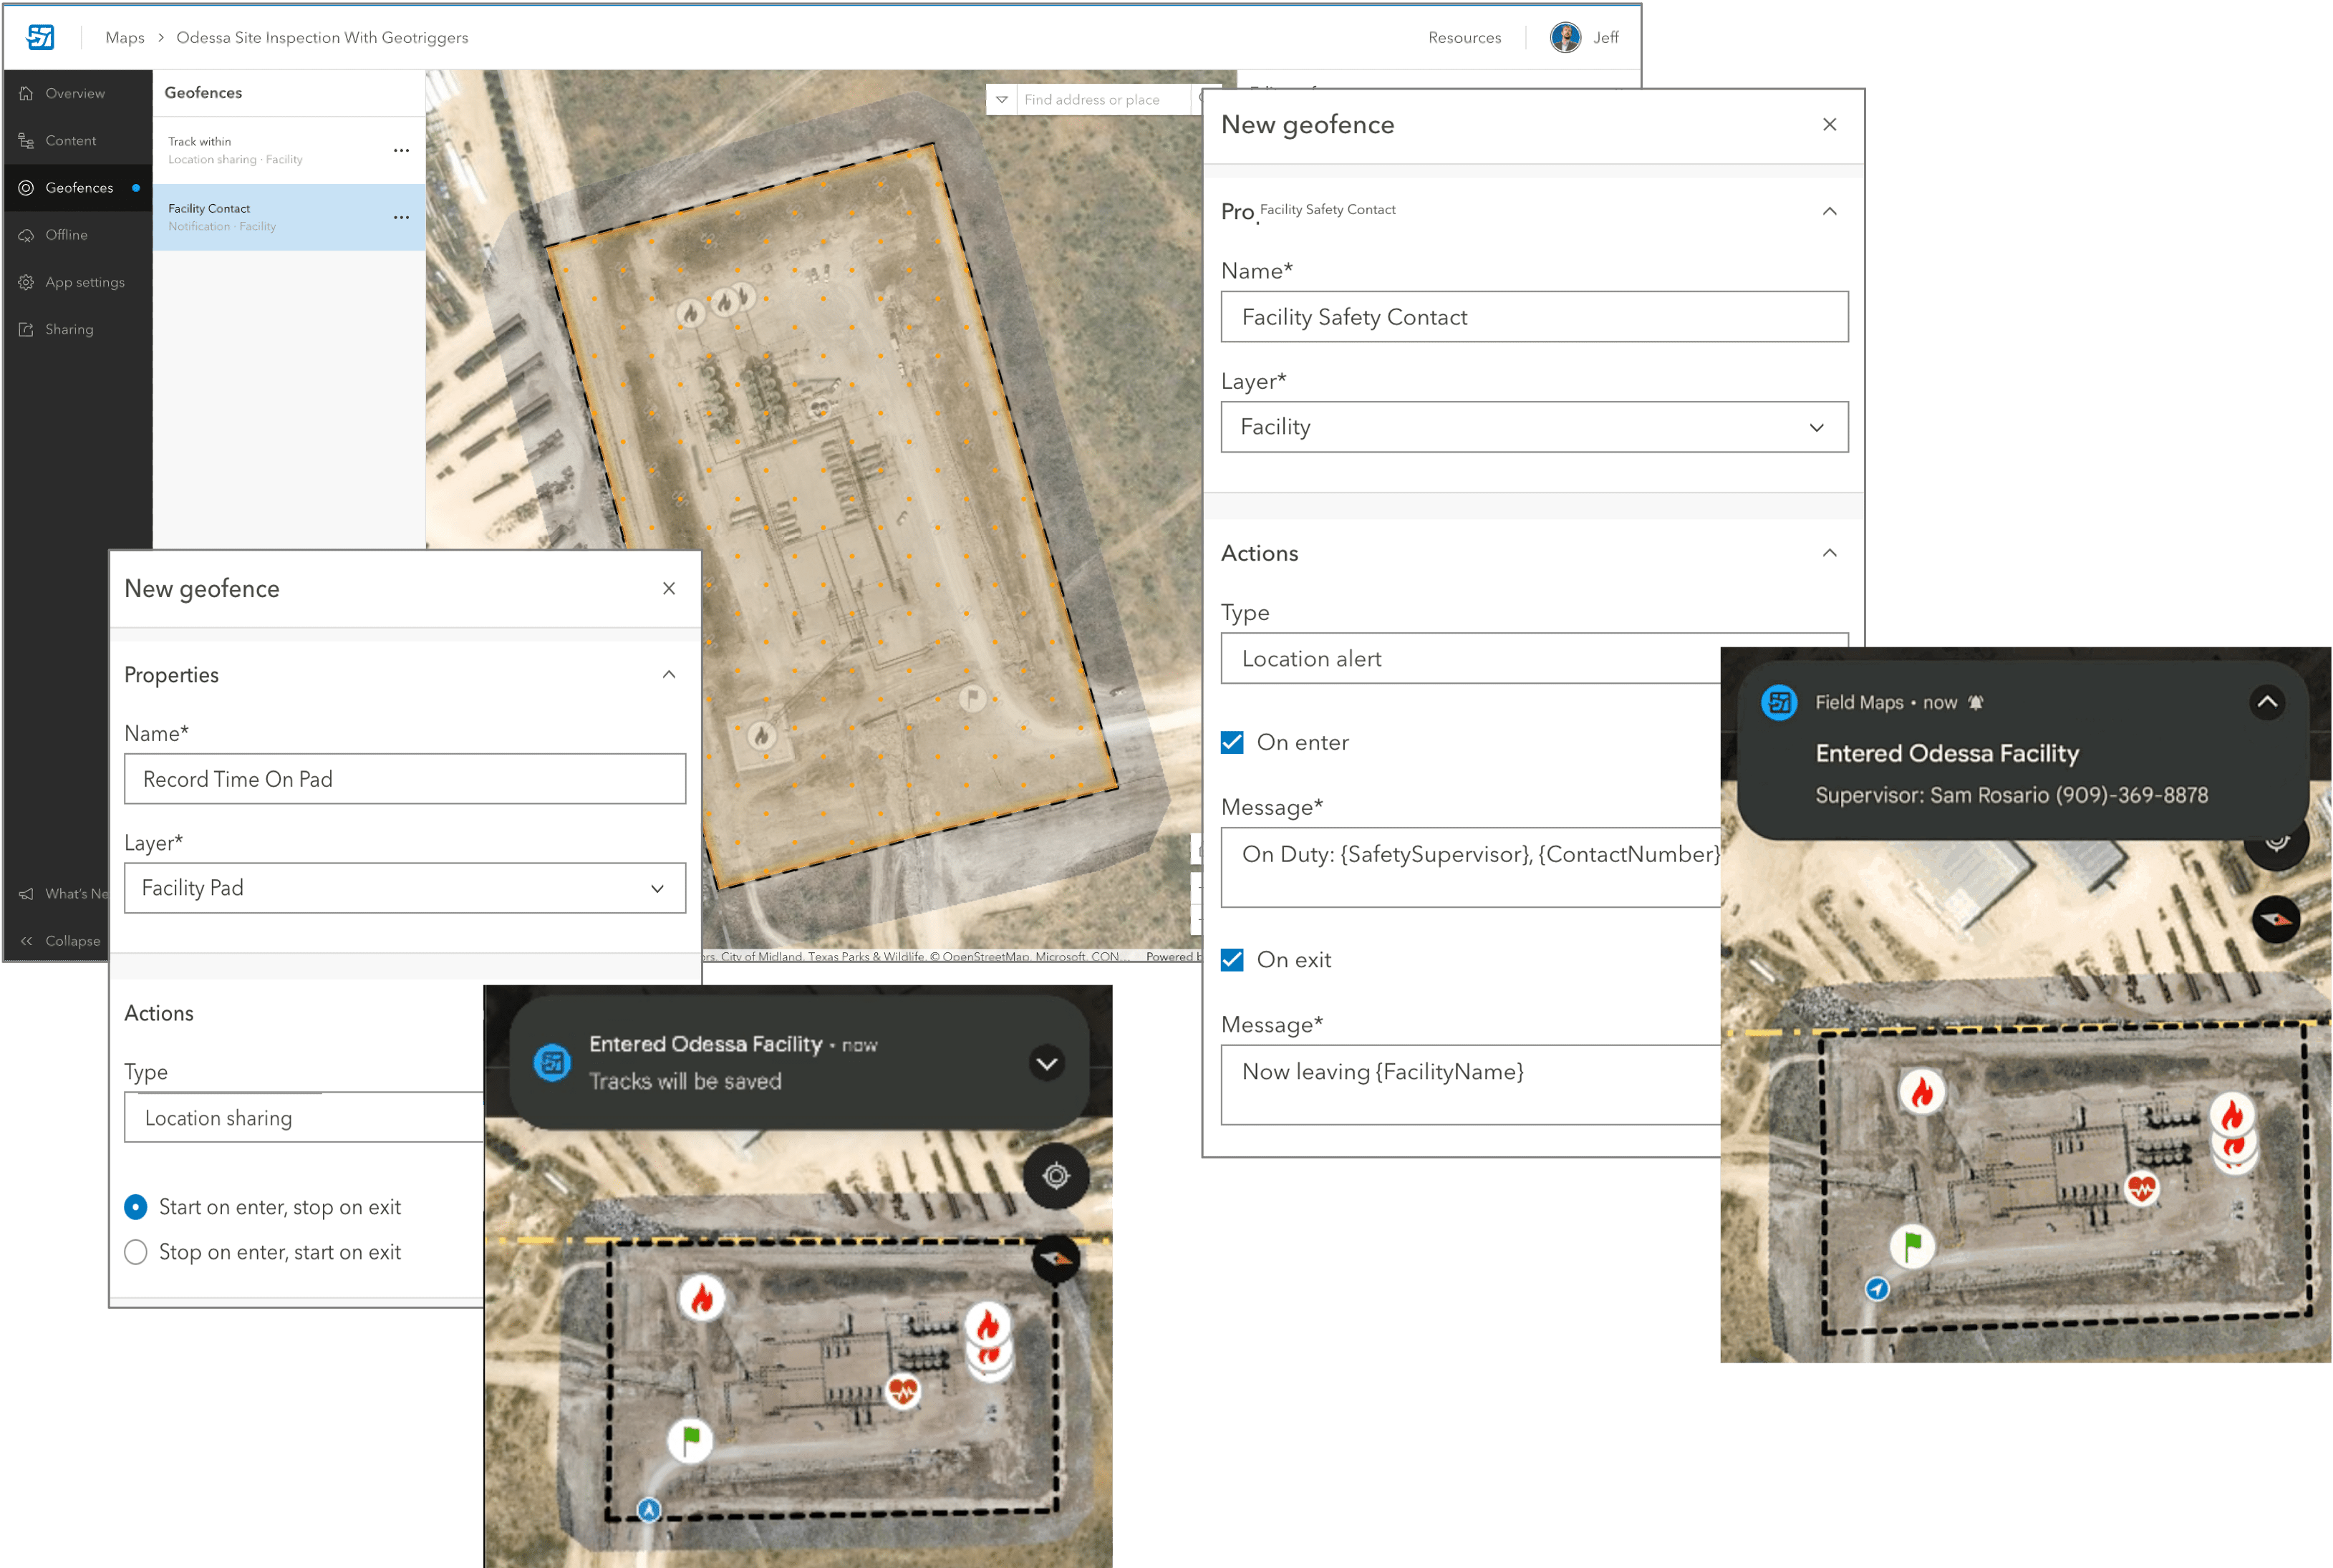 Control location tracking and receive location alerts by adding geofences to your map.